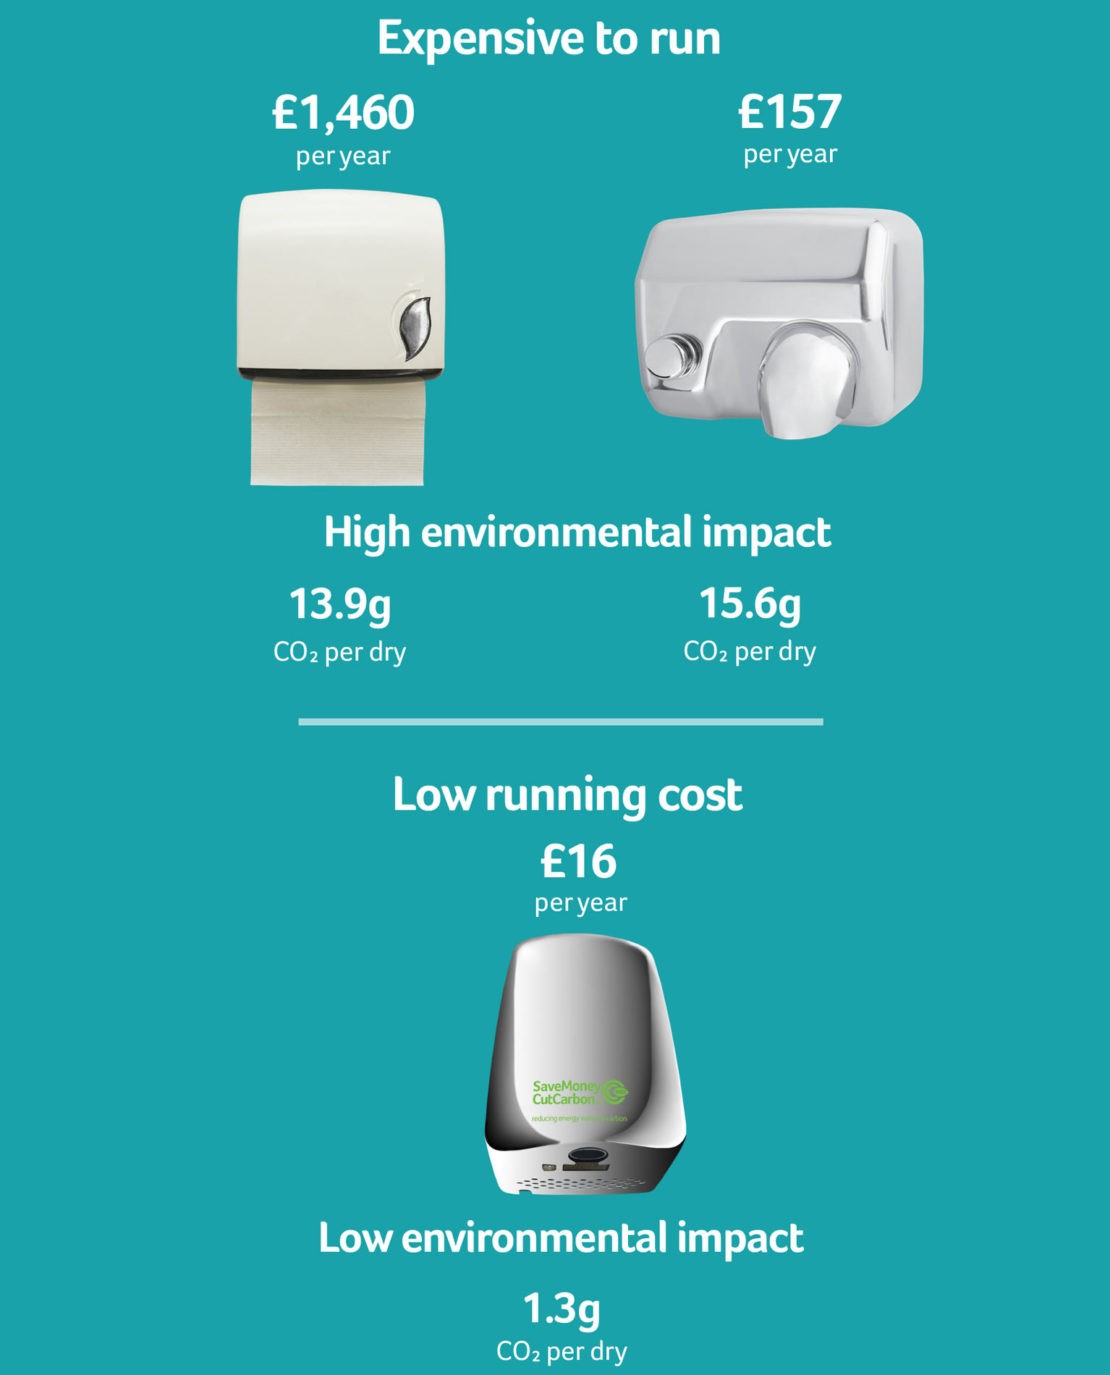 https://www.savemoneycutcarbon.com/wp-content/uploads/2018/12/old-v-new-eco-hand-dryers-mob-1110x1375.jpg